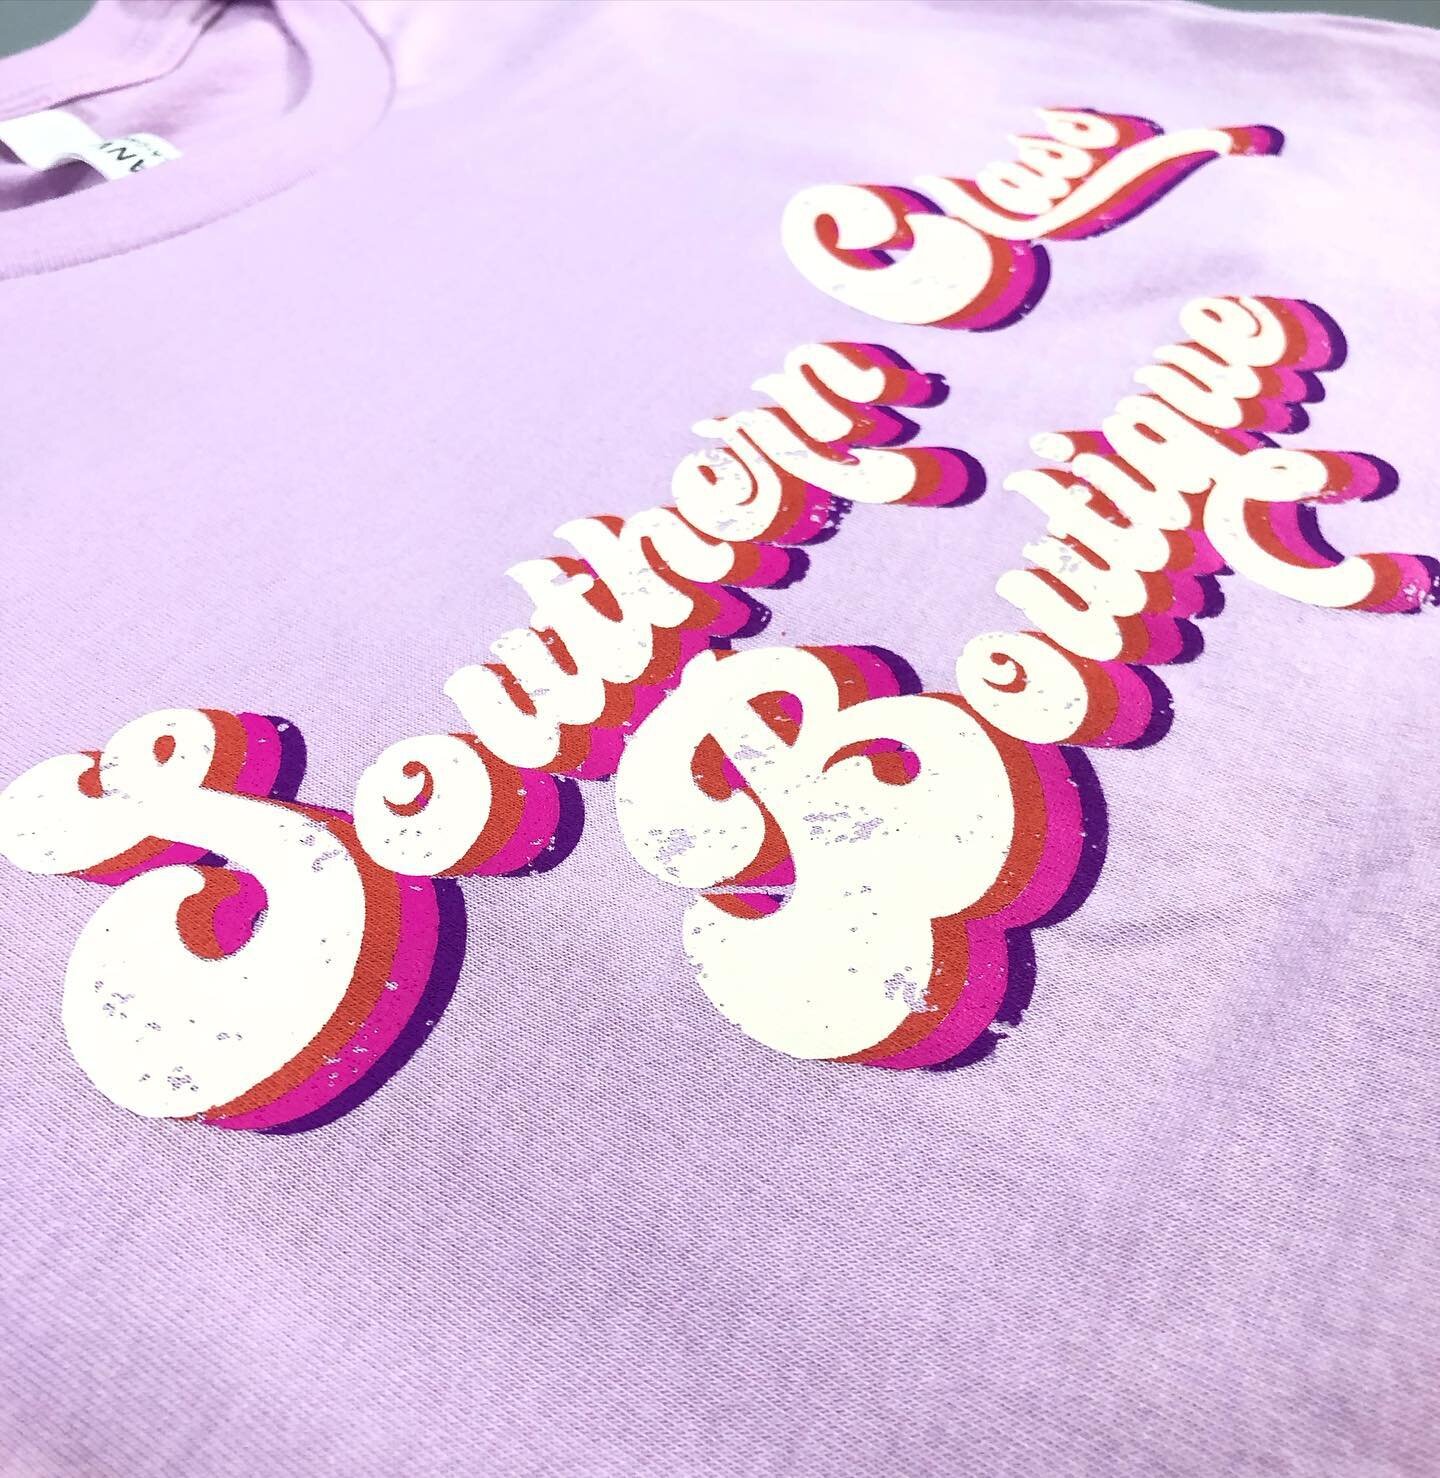 Retro 70&rsquo;s inspired 4 color print on lilac tees for the incredible @shopsouthernclass!